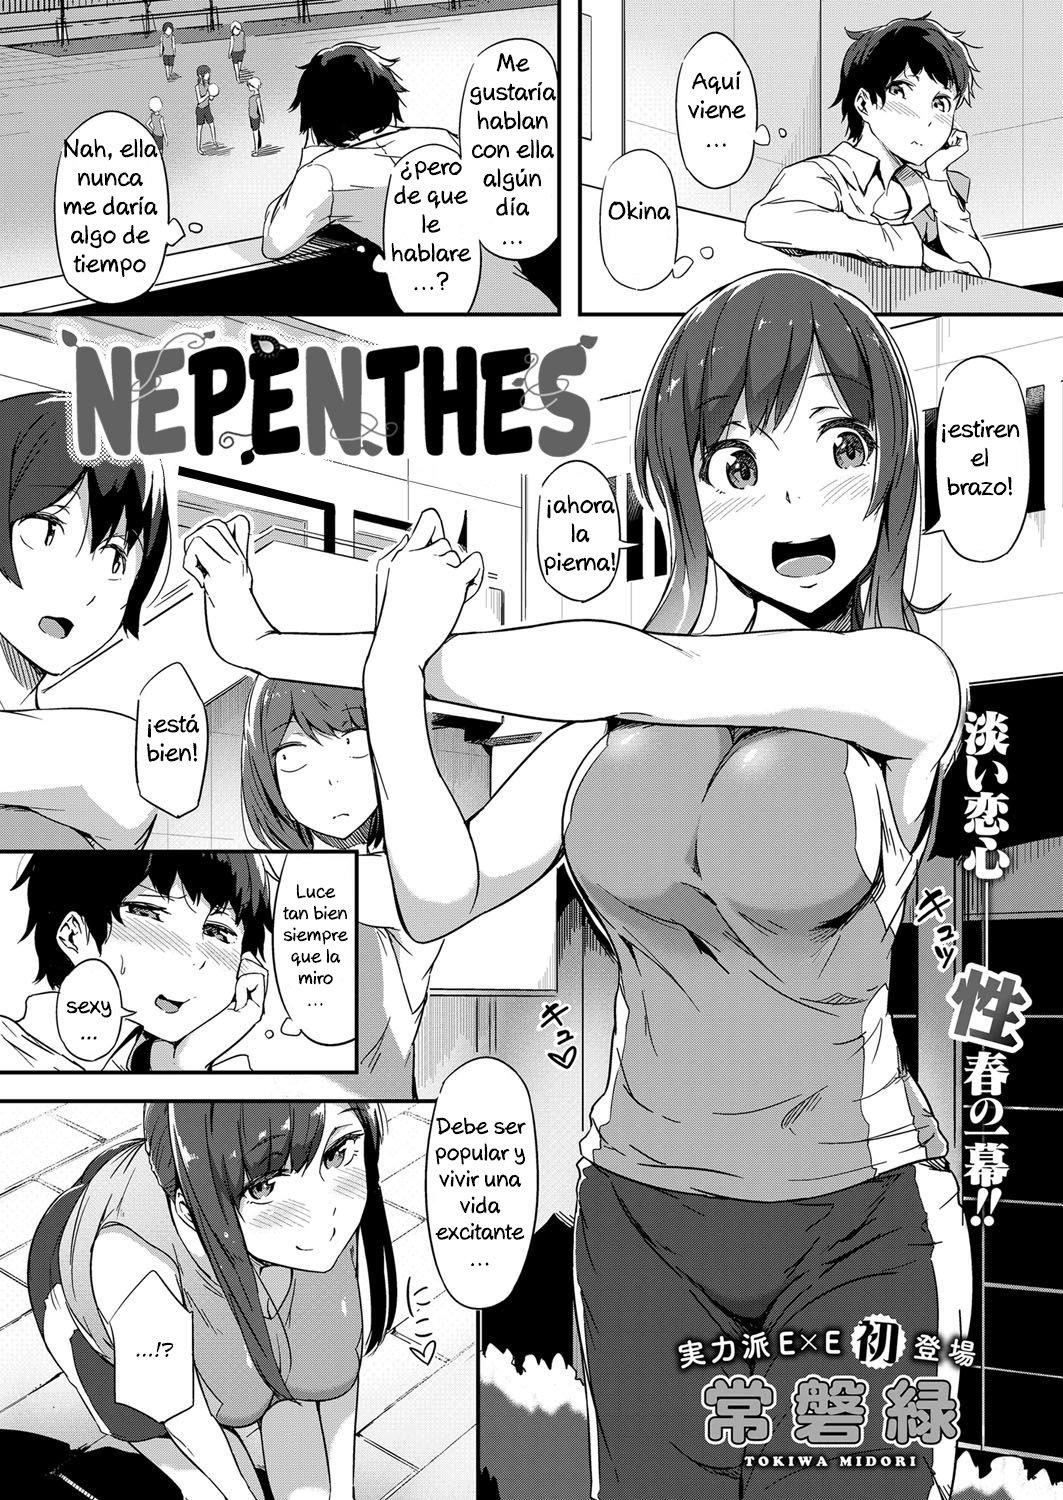 Nepenthes - 0